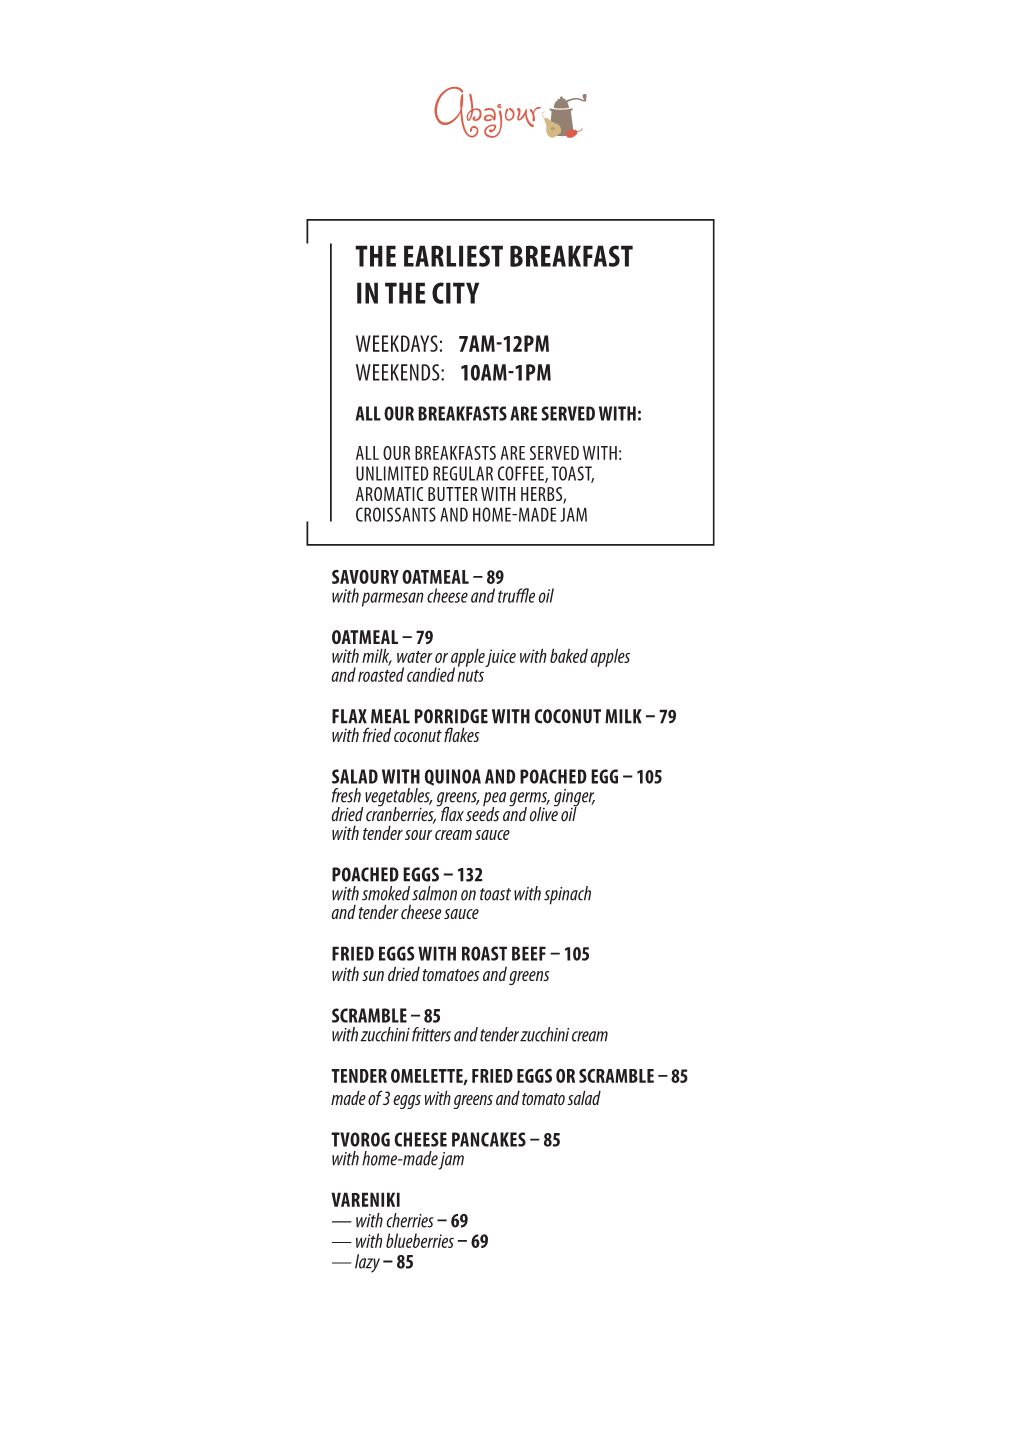 The Earliest Breakfast in the City Weekdays: 7Am-12Pm Weekends: 10Am-1Pm All Our Breakfasts Are Served With